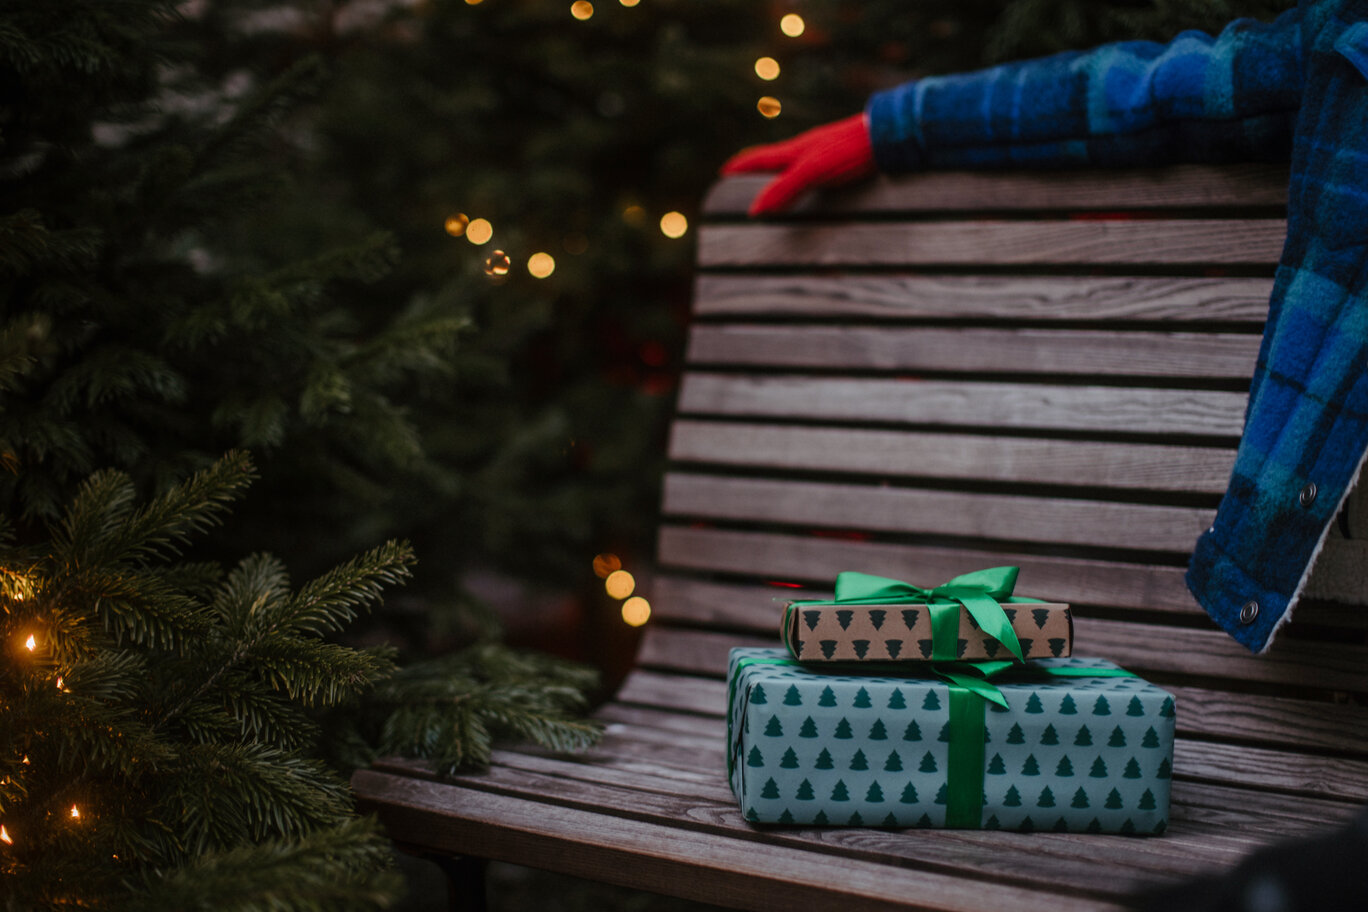 The Top 8 Gifts Consumers are Buying This Year According to Afterpay